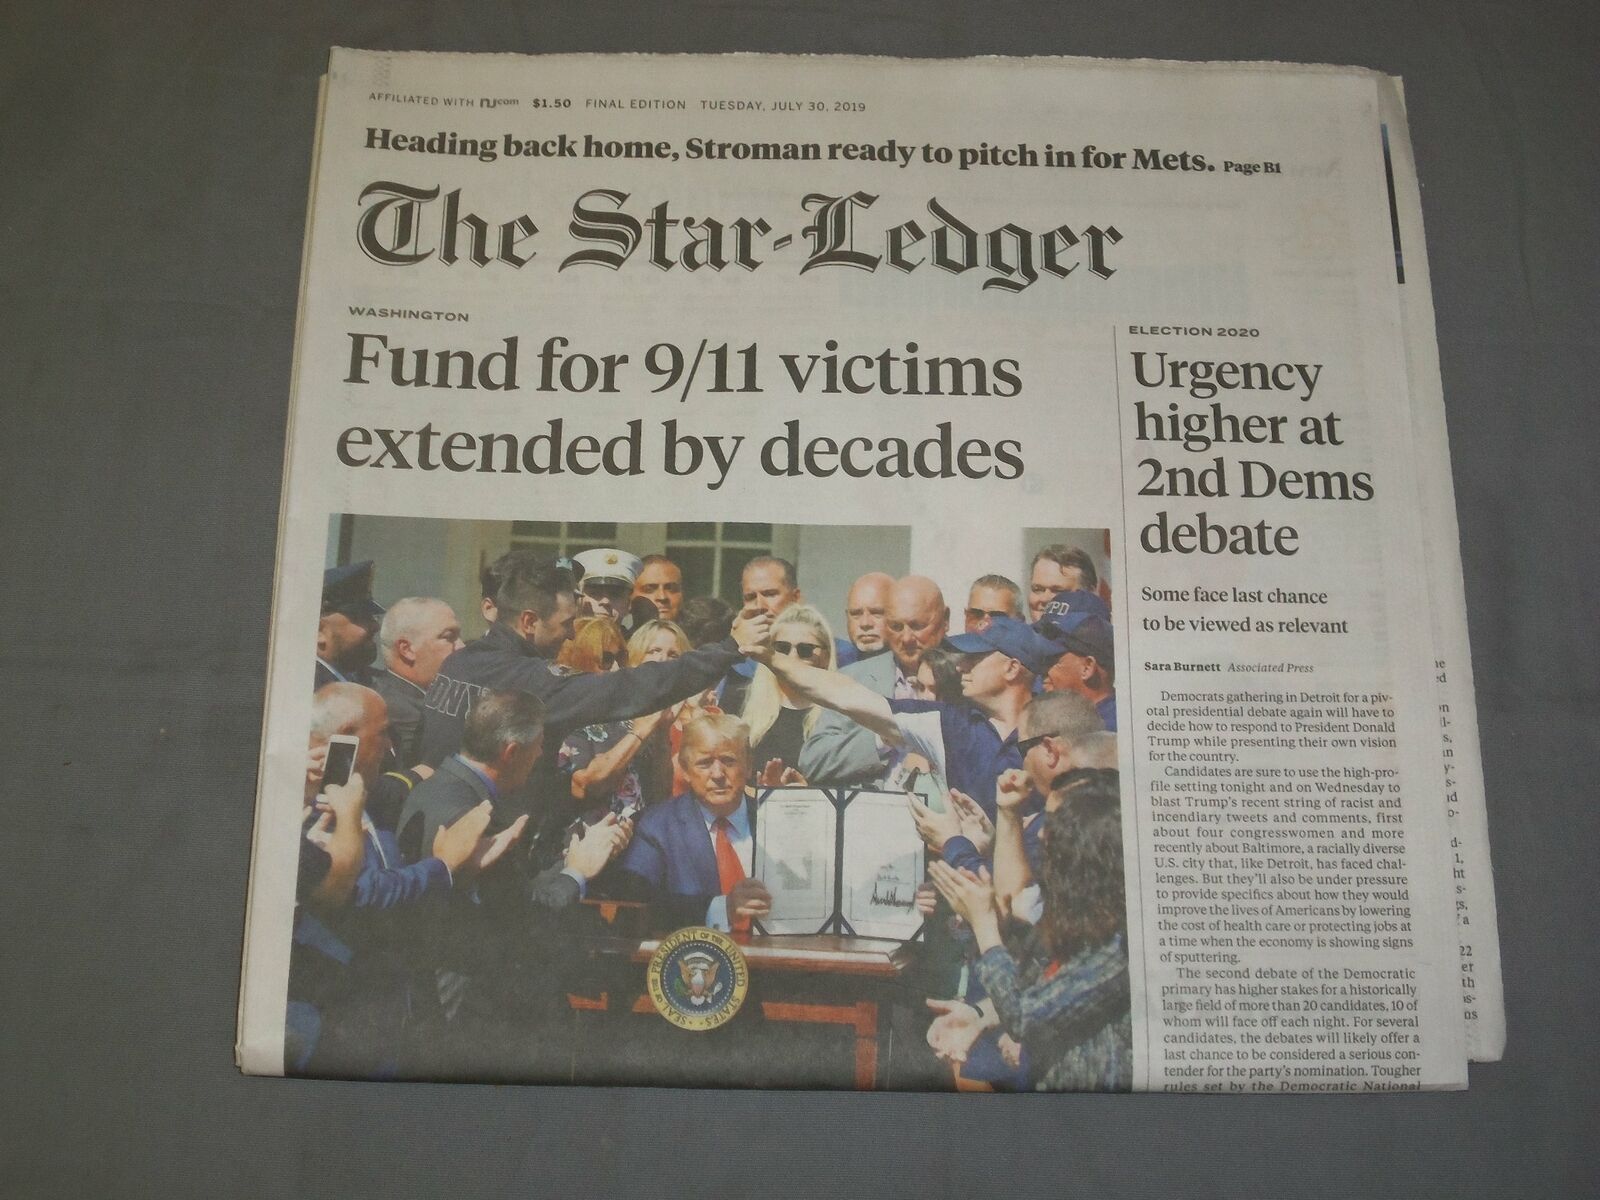 2019 JULY 30 THE STAR-LEDGER NEWSPAPER-FUND FOR 9/11 VICTIMS EXTENDED BY DECADES